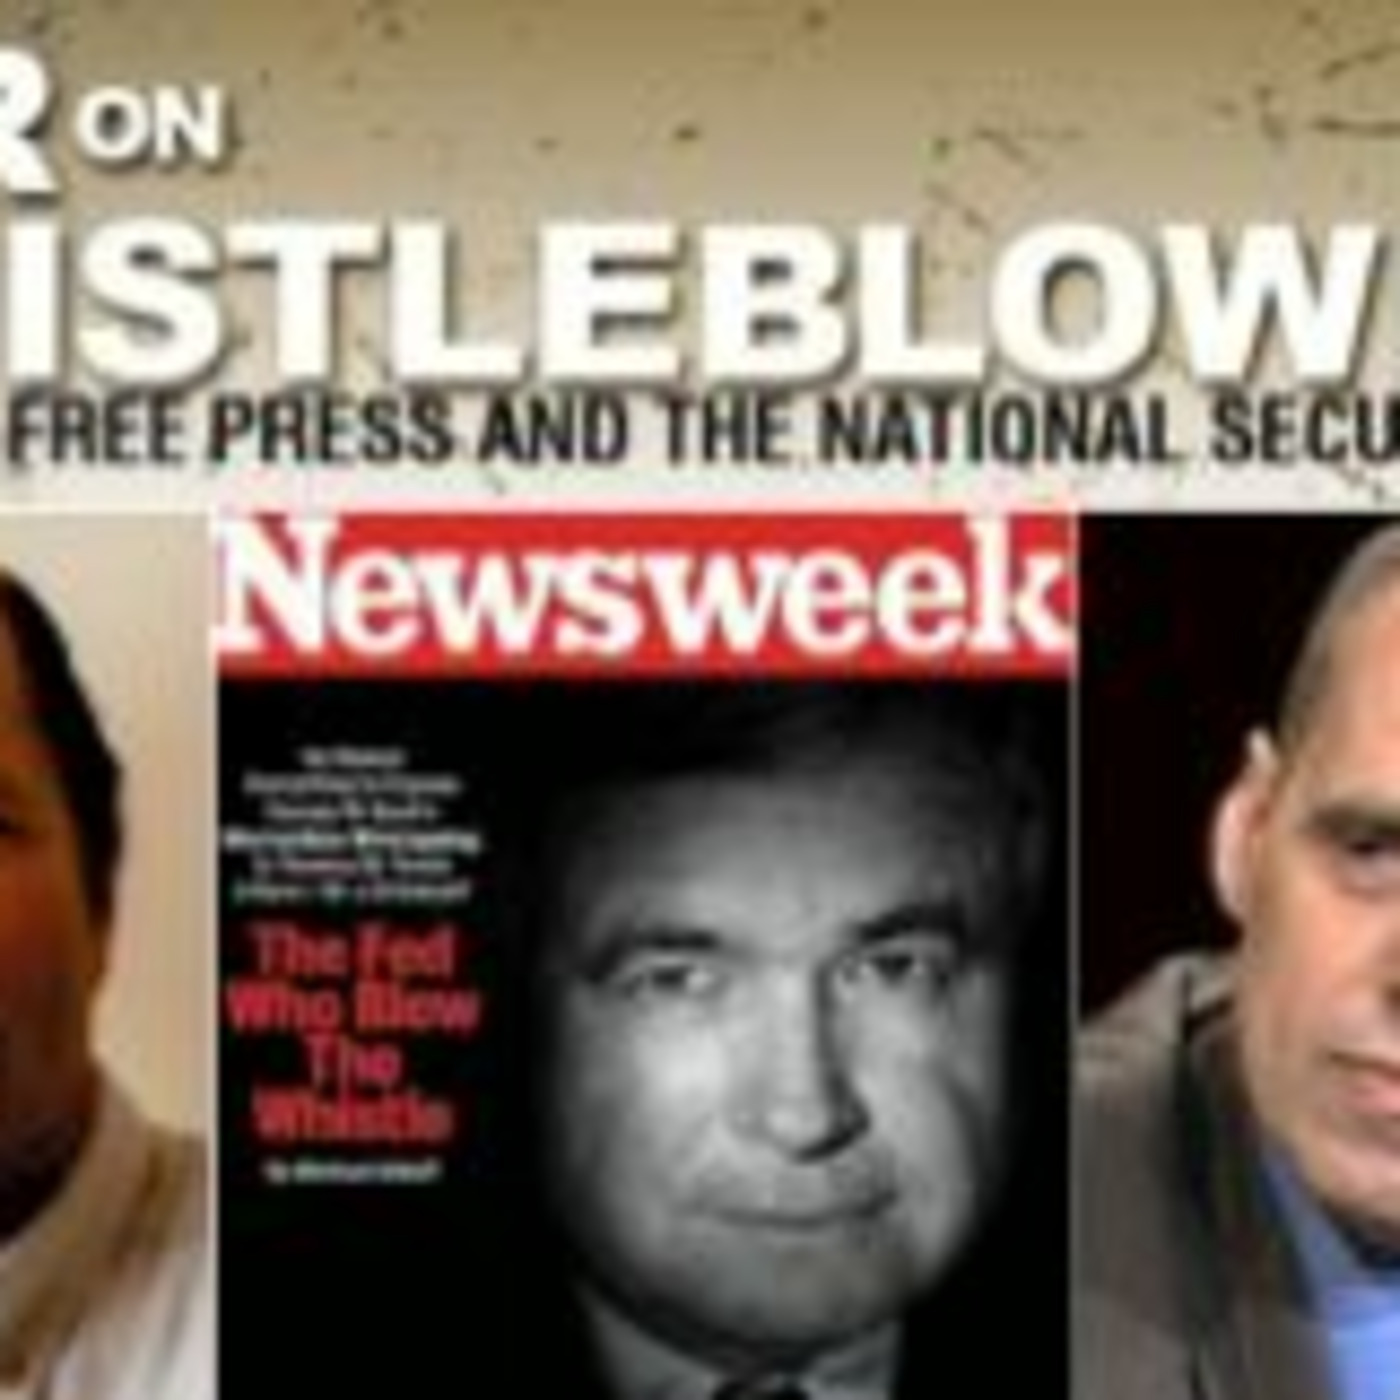 Free Forum Q&A w/ Director, Robert Greenwald and Two Whistleblowers